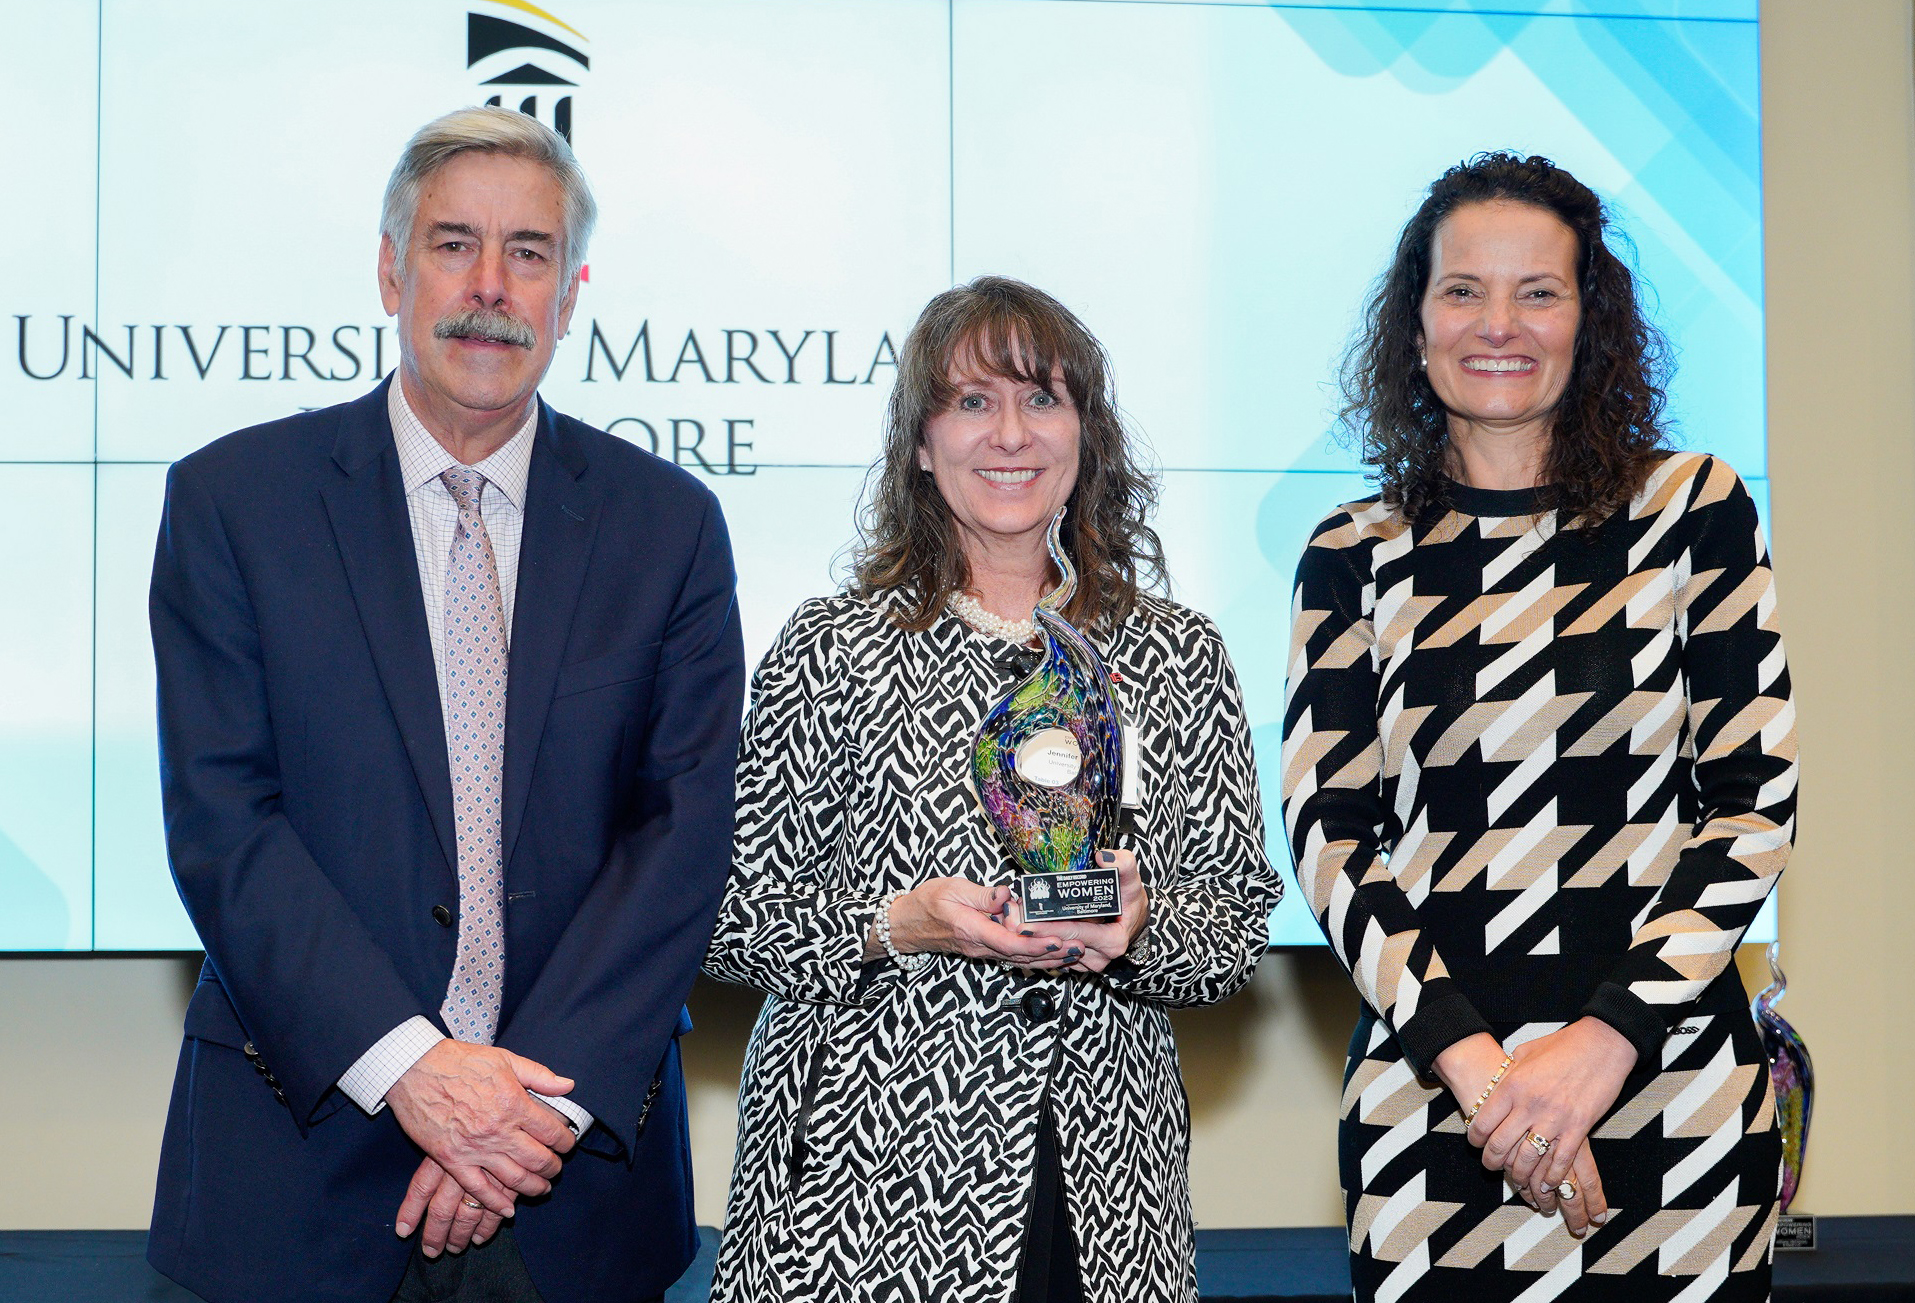 UMB’s Jennifer Litchman (center) accepts the University’s Empowering Women Award from Thomas Baden Jr. (left) and Suzanne Fischer-Huettner of “The Daily Record.”